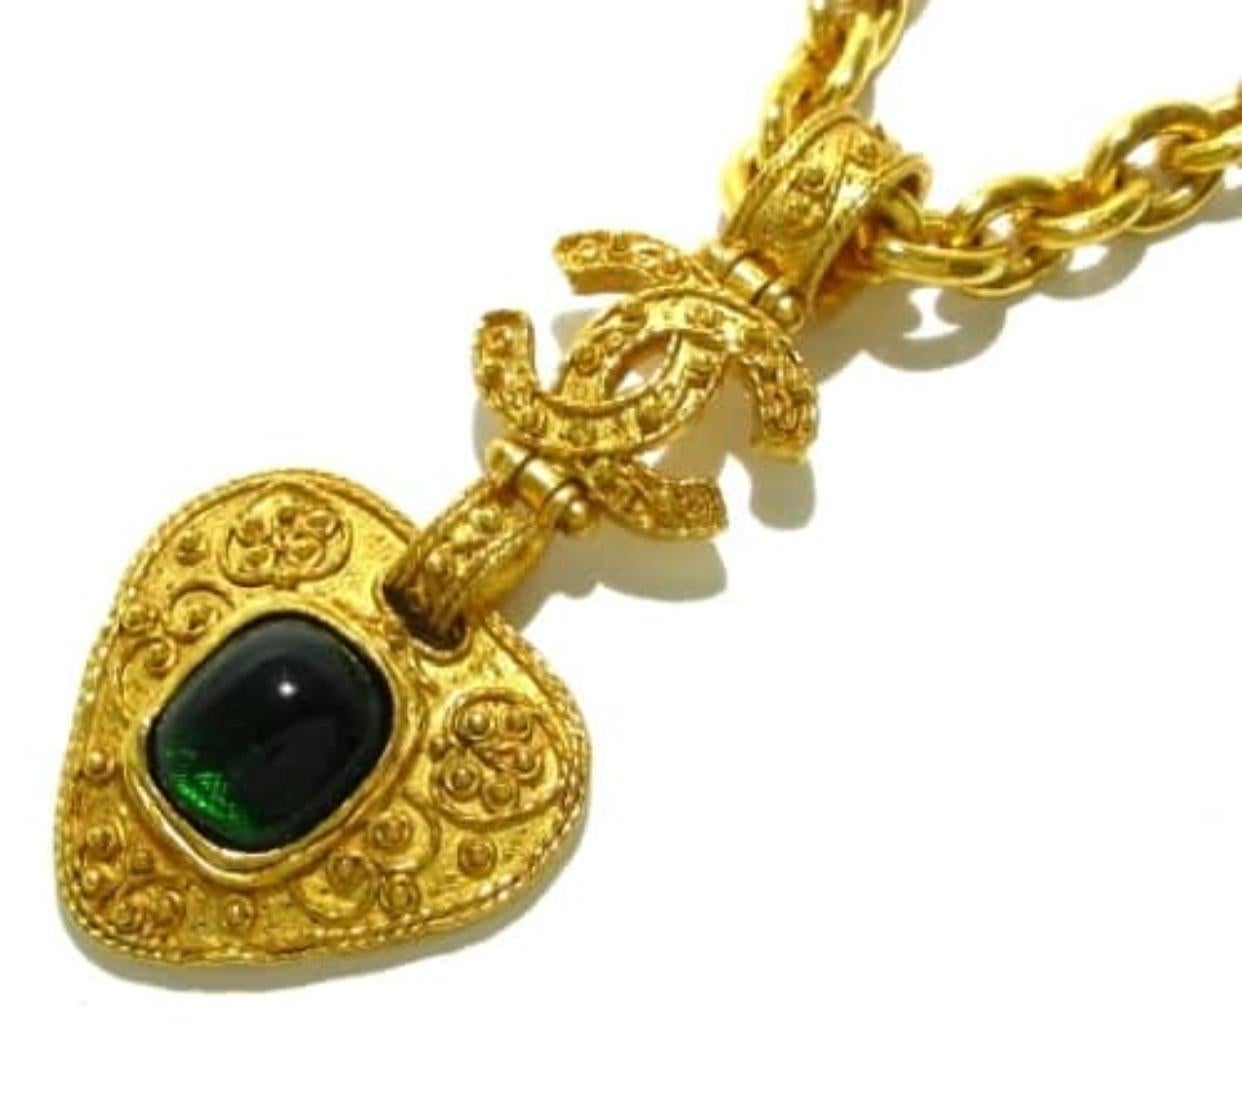 1990s. Vintage Chanel thick chain long statement necklace with CC and green gripoix glass featured pendant top. Gorgeous masterpiece.

Introducing a rare vintage piece from CHANEL from 90's.
Golden gorgeous thick chain long statement necklace with